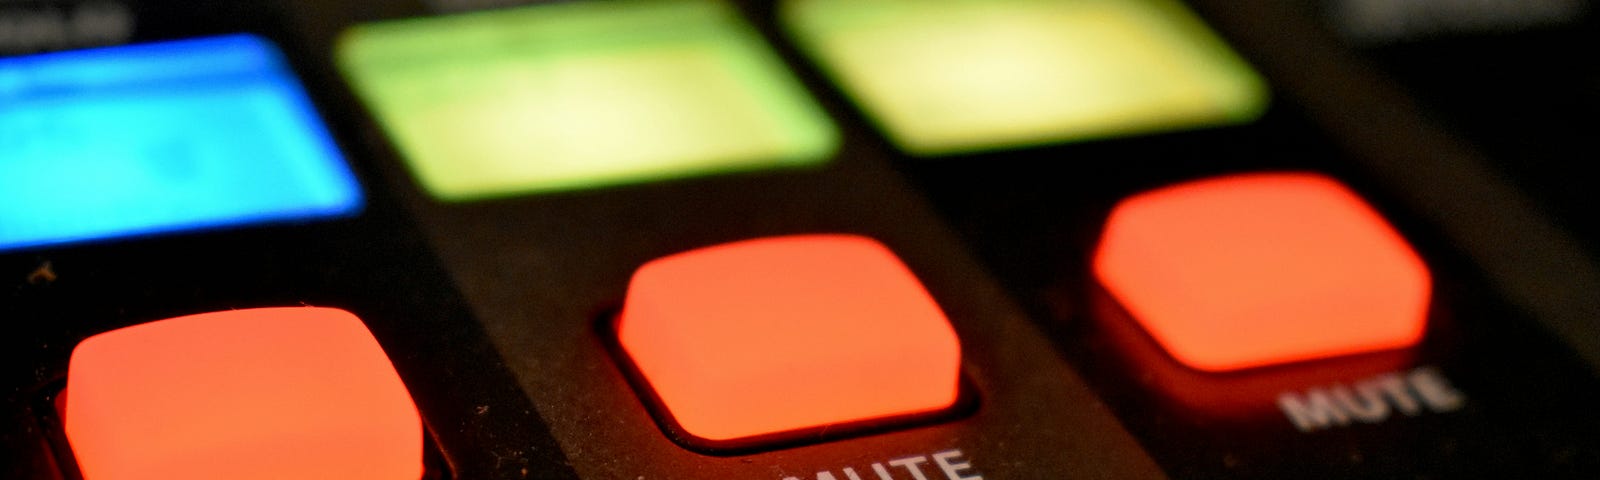 Three lit-up red buttons each labelled “mute” on black equipment